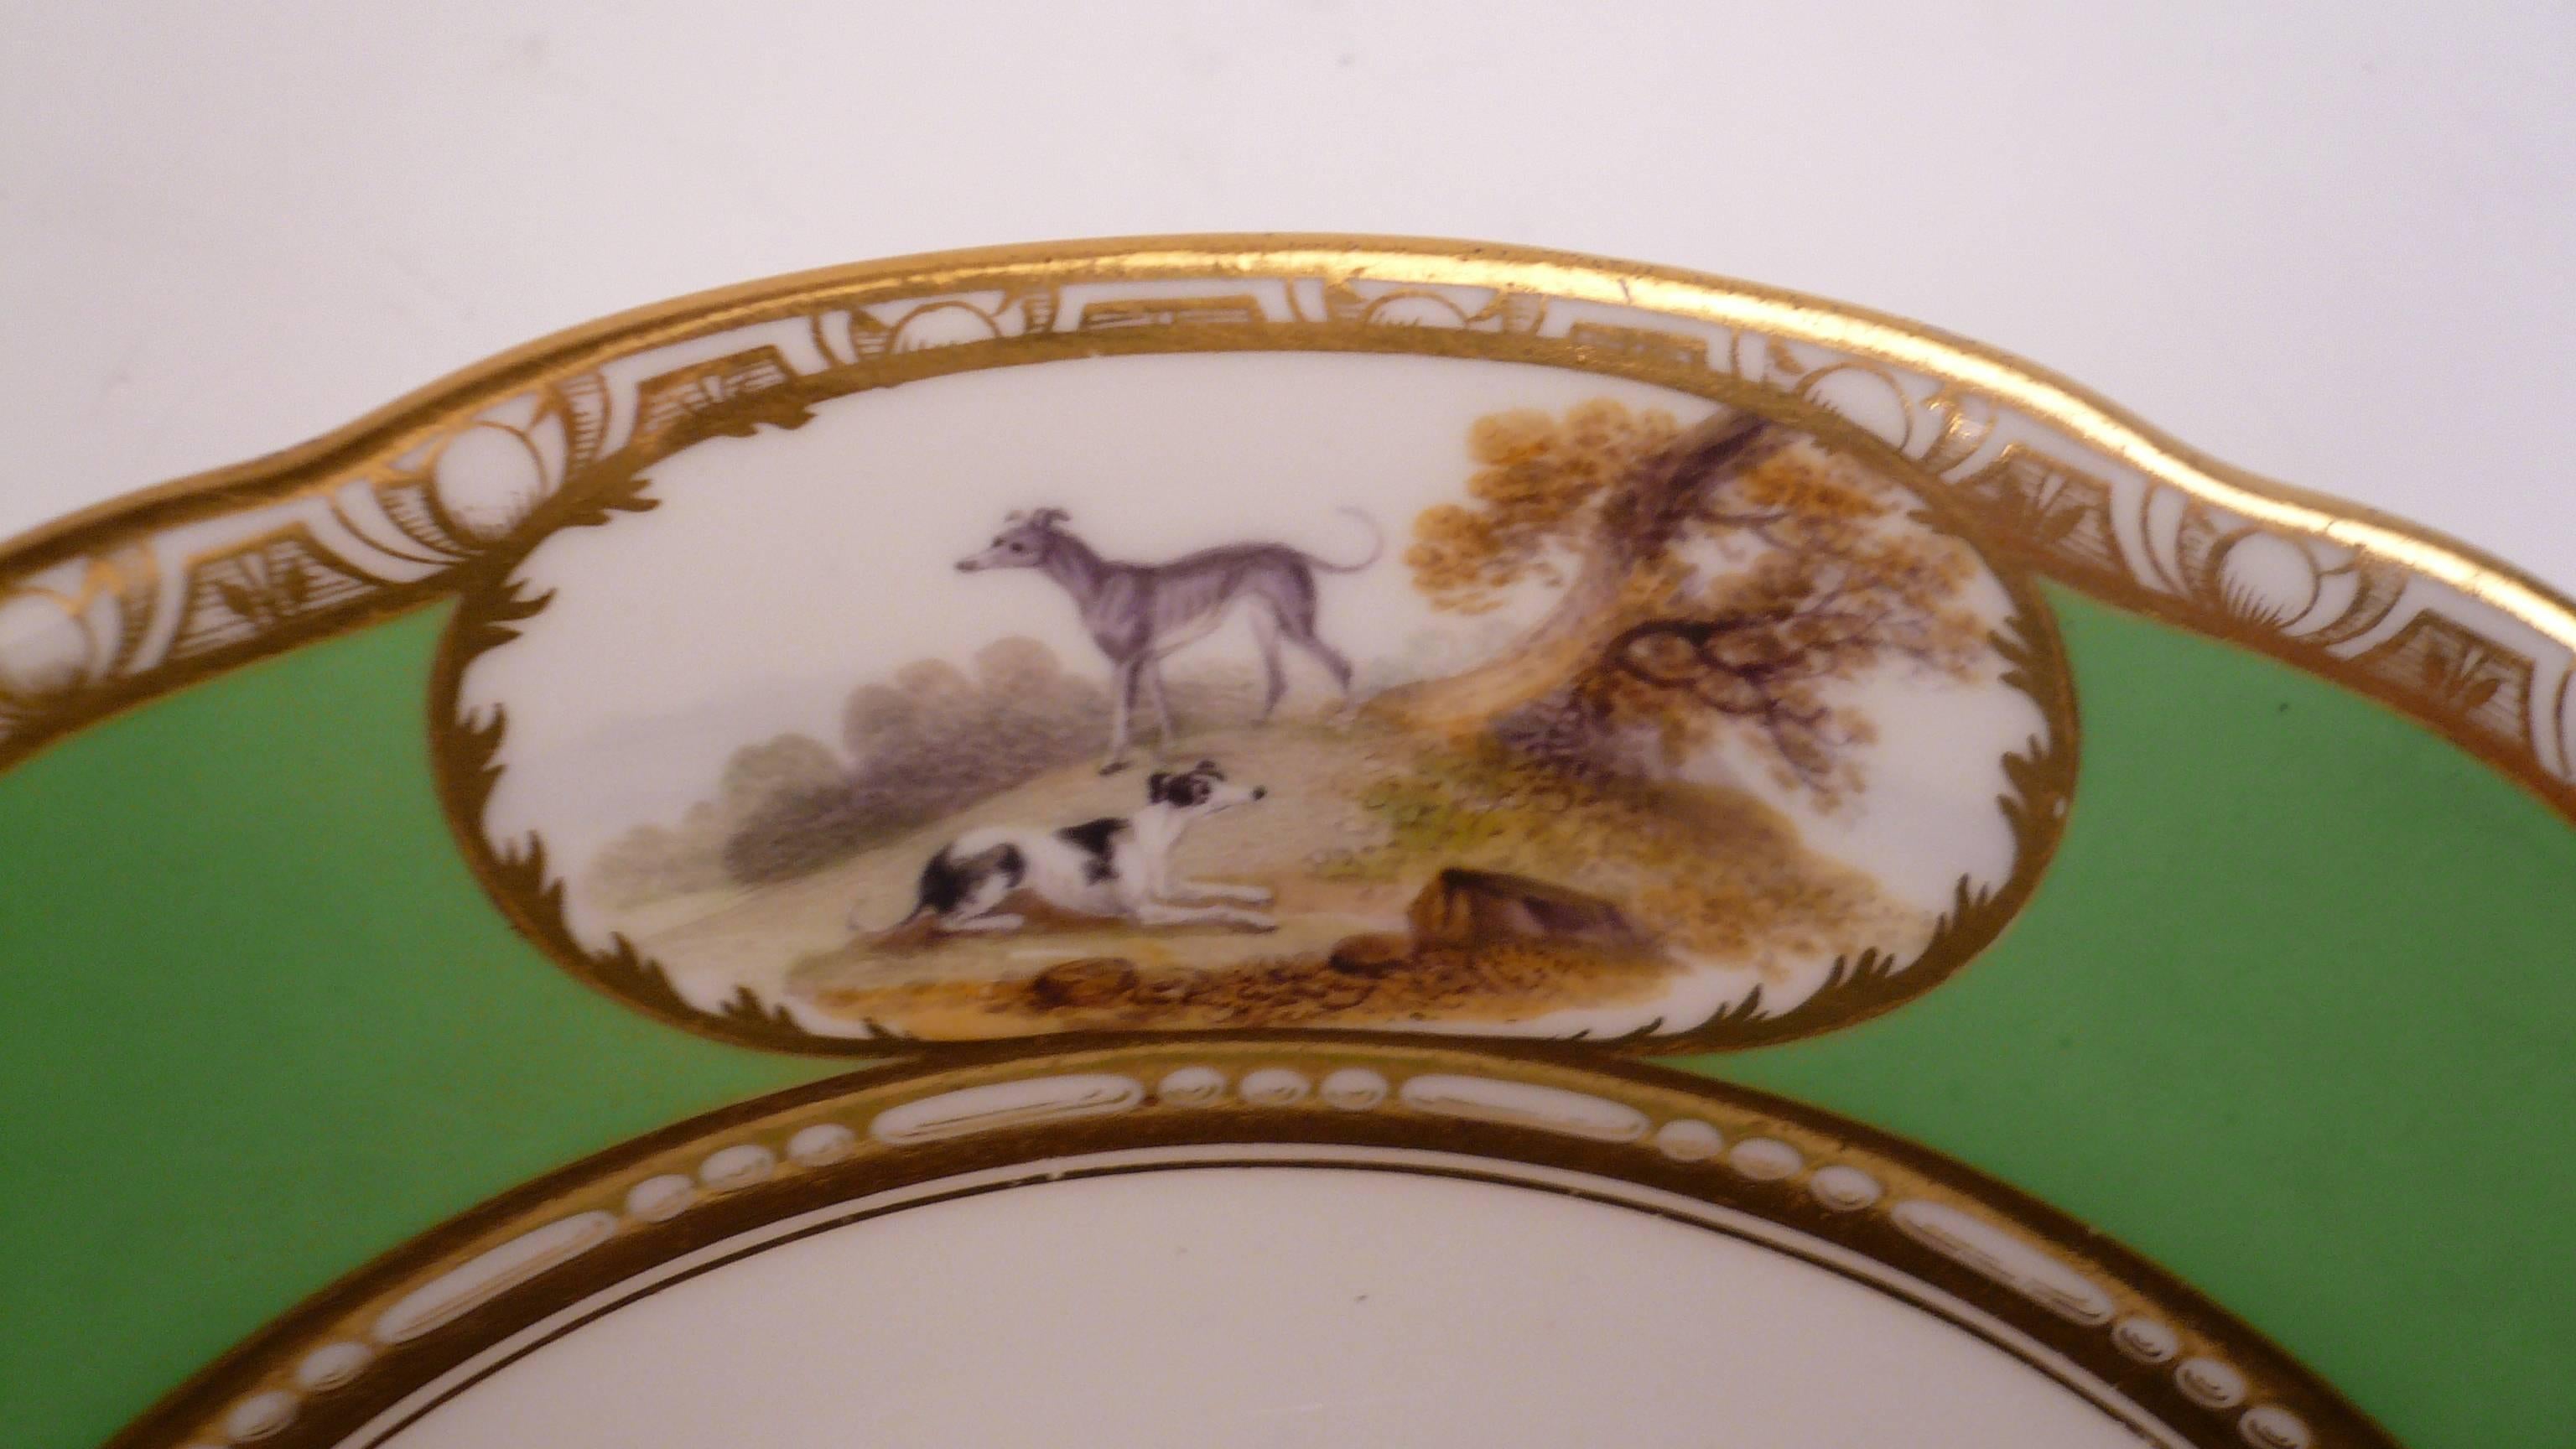 19th Century Pair of Antique English Porcelain Sporting Plates